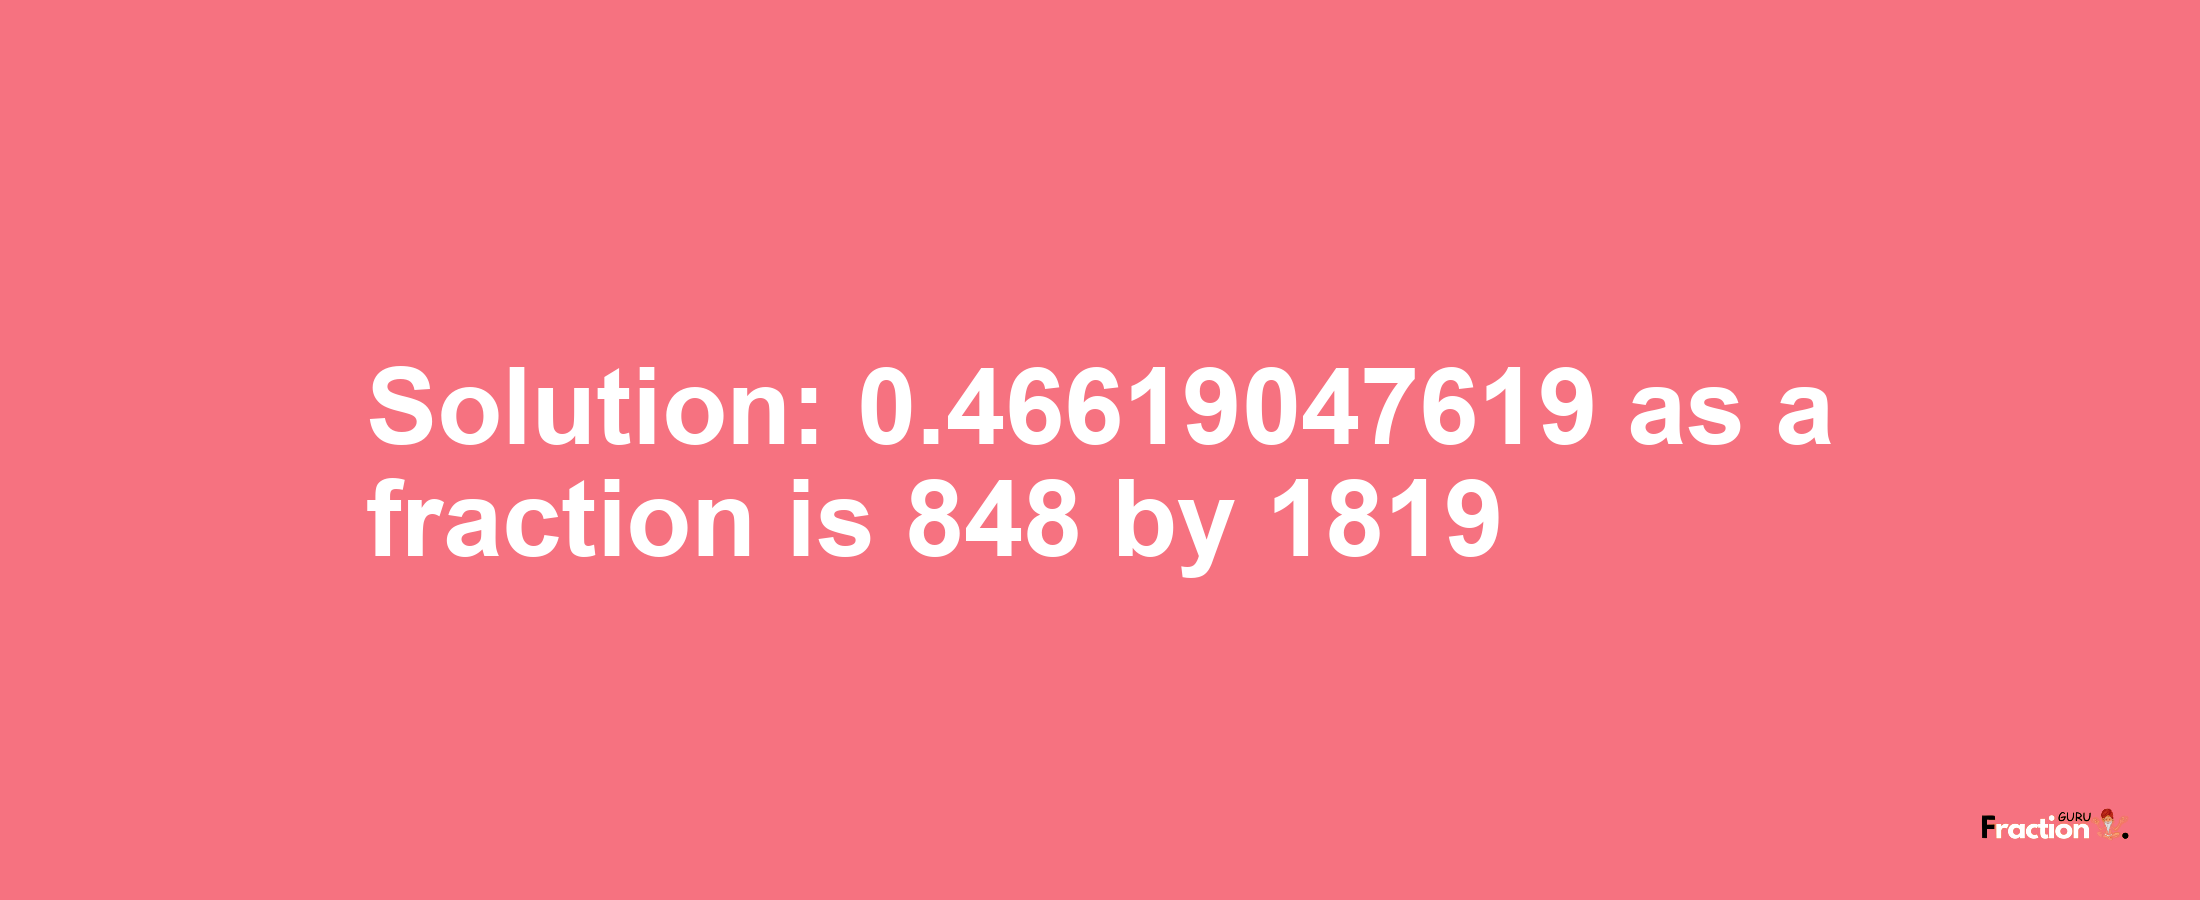 Solution:0.46619047619 as a fraction is 848/1819